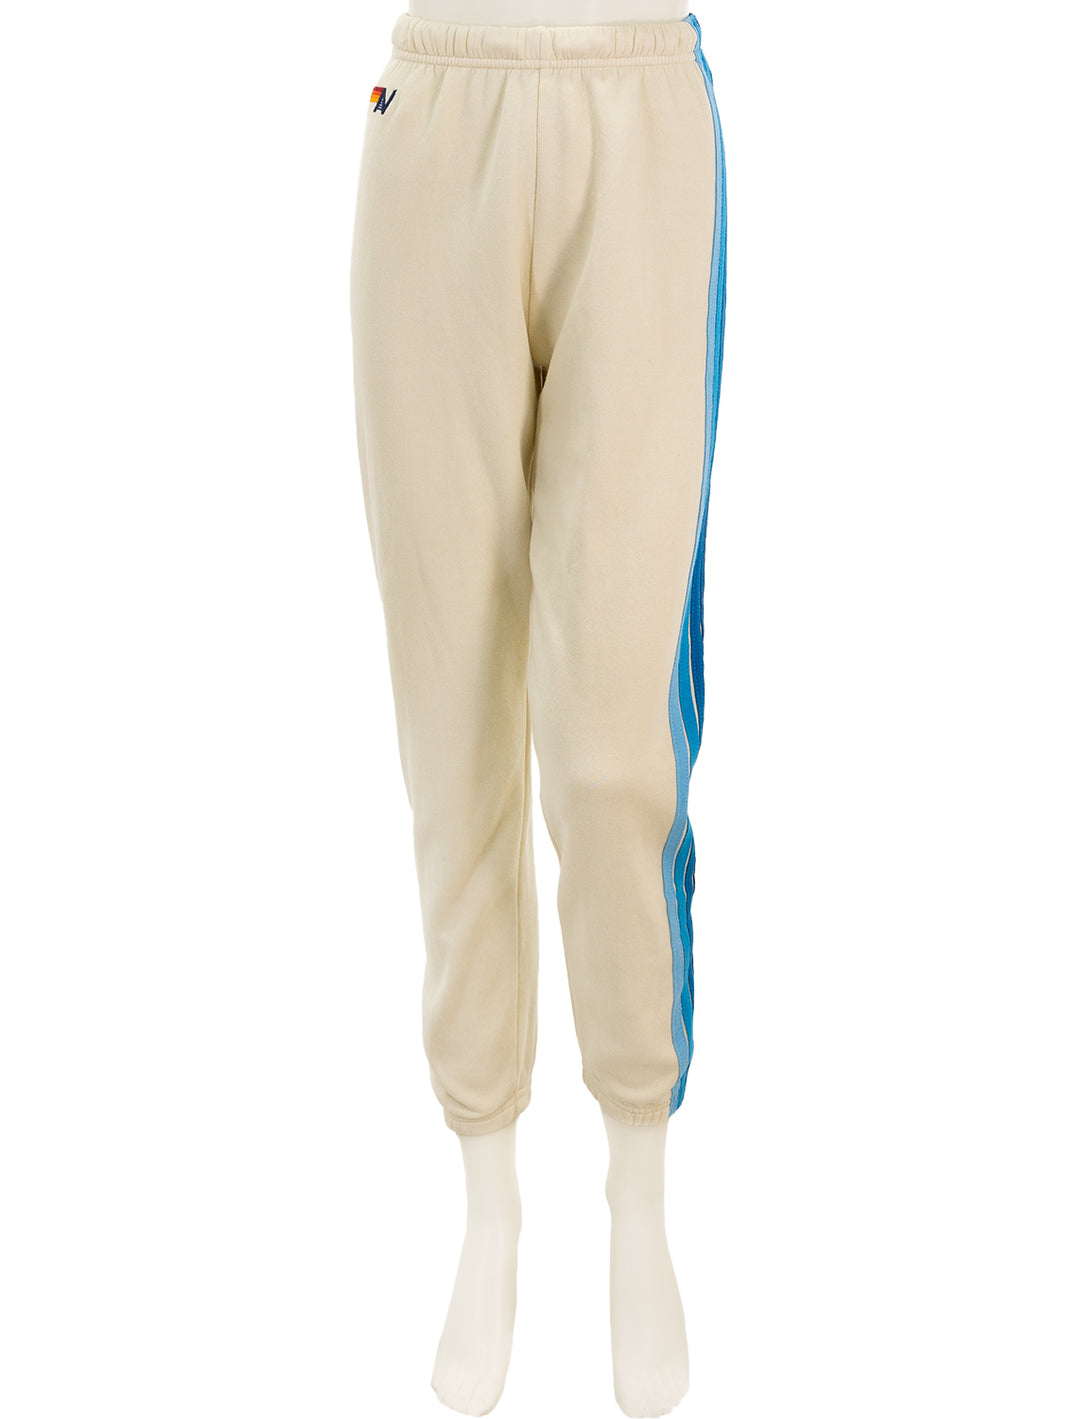 Front view of Aviator Nation's 5 stripe womens sweatpants in vintage white and blue.